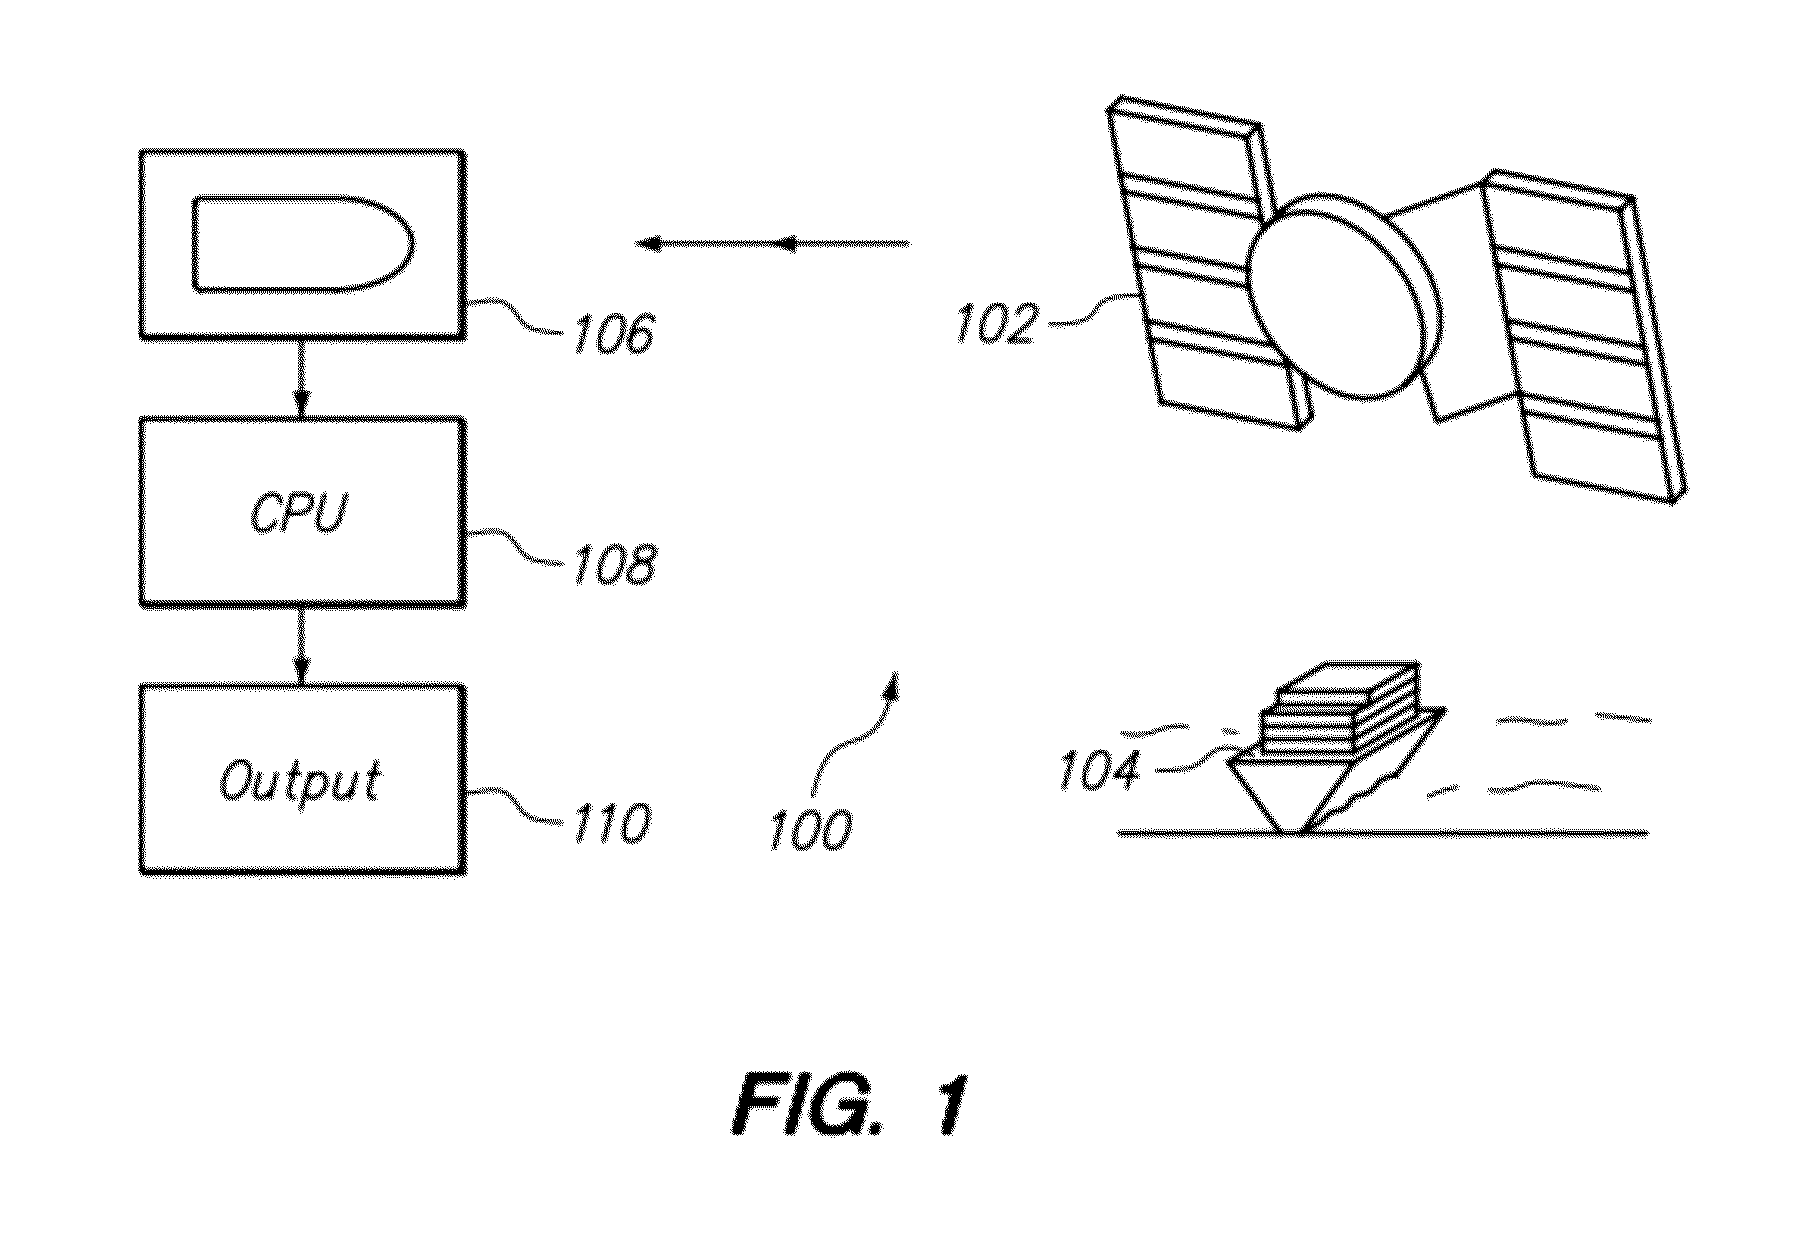 Method for classifying vessels using features extracted from overhead imagery